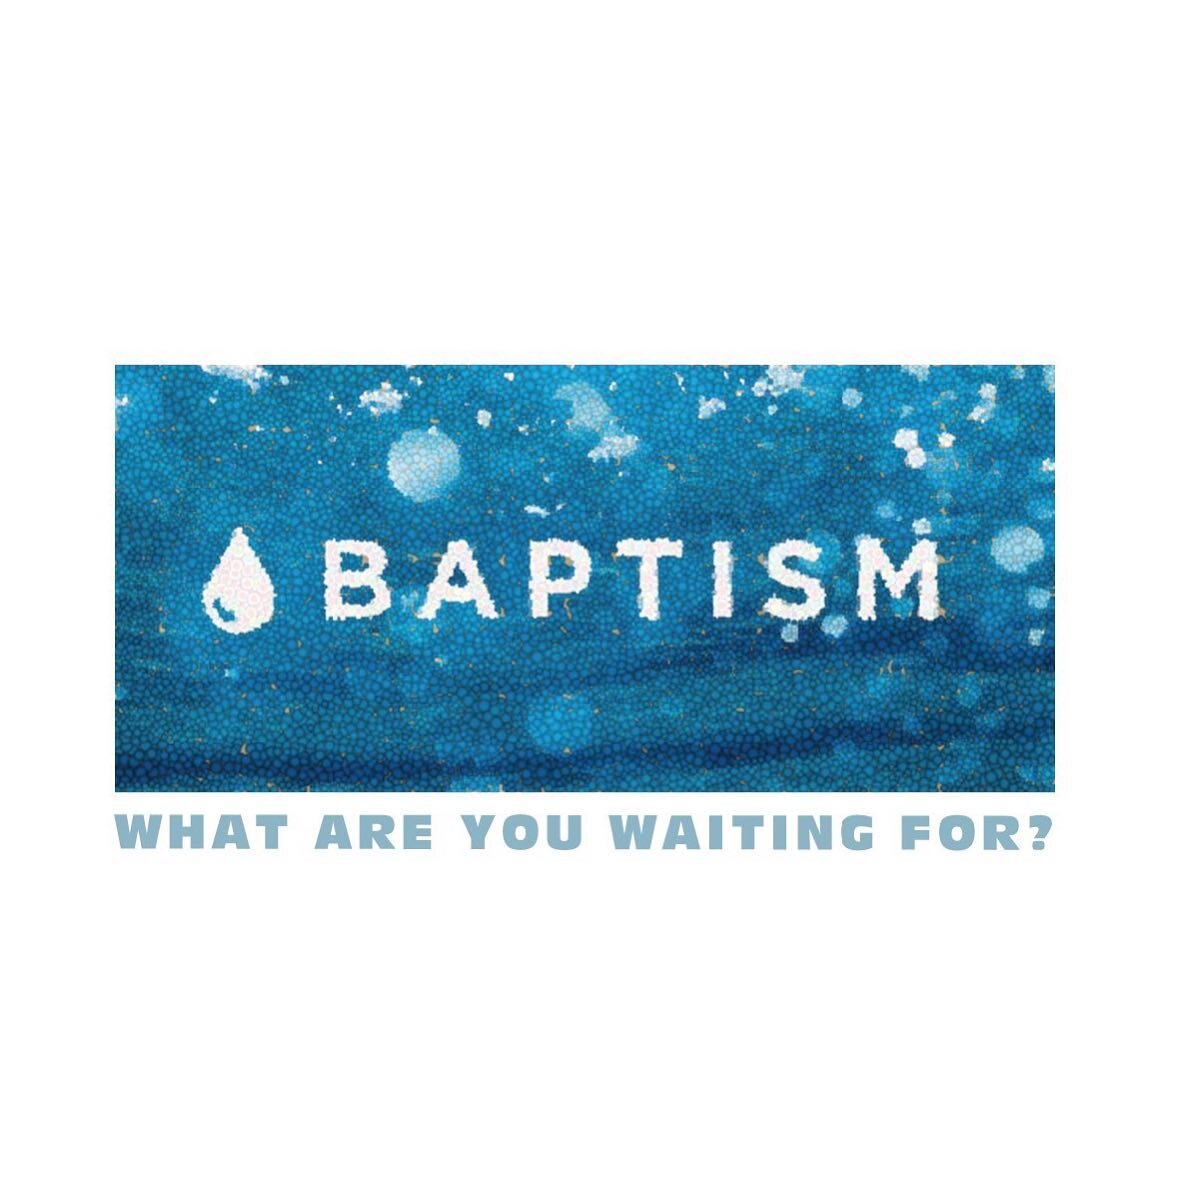 Have you been baptized? Do you have questions about baptism? If no and yes were your answers, please consider emailing us at quest@vbc.online and we will follow-up with you. 

Baptism is a public declaration of one's personal faith and commitment to 